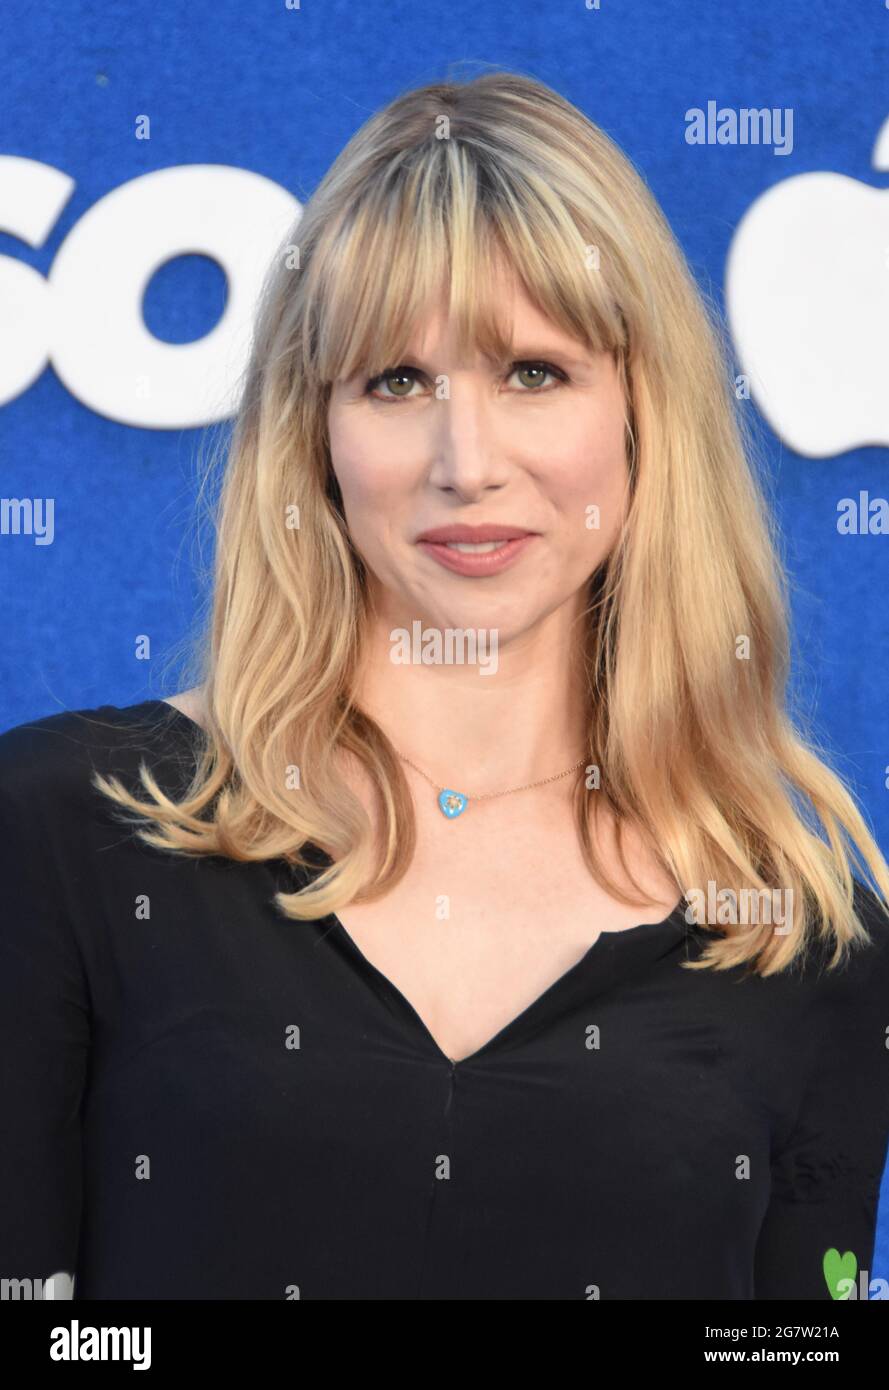 West Hollywood, California, USA. 15th July, 2021. Actress Lucy Punch attends Apple's 'Ted Lasso' Season Two Premiere Event at The Rooftop at The Pacific Design Center on July 15, 2021 in West Hollywood, California, USA. Credit: Barry King/Alamy Live News Stock Photo